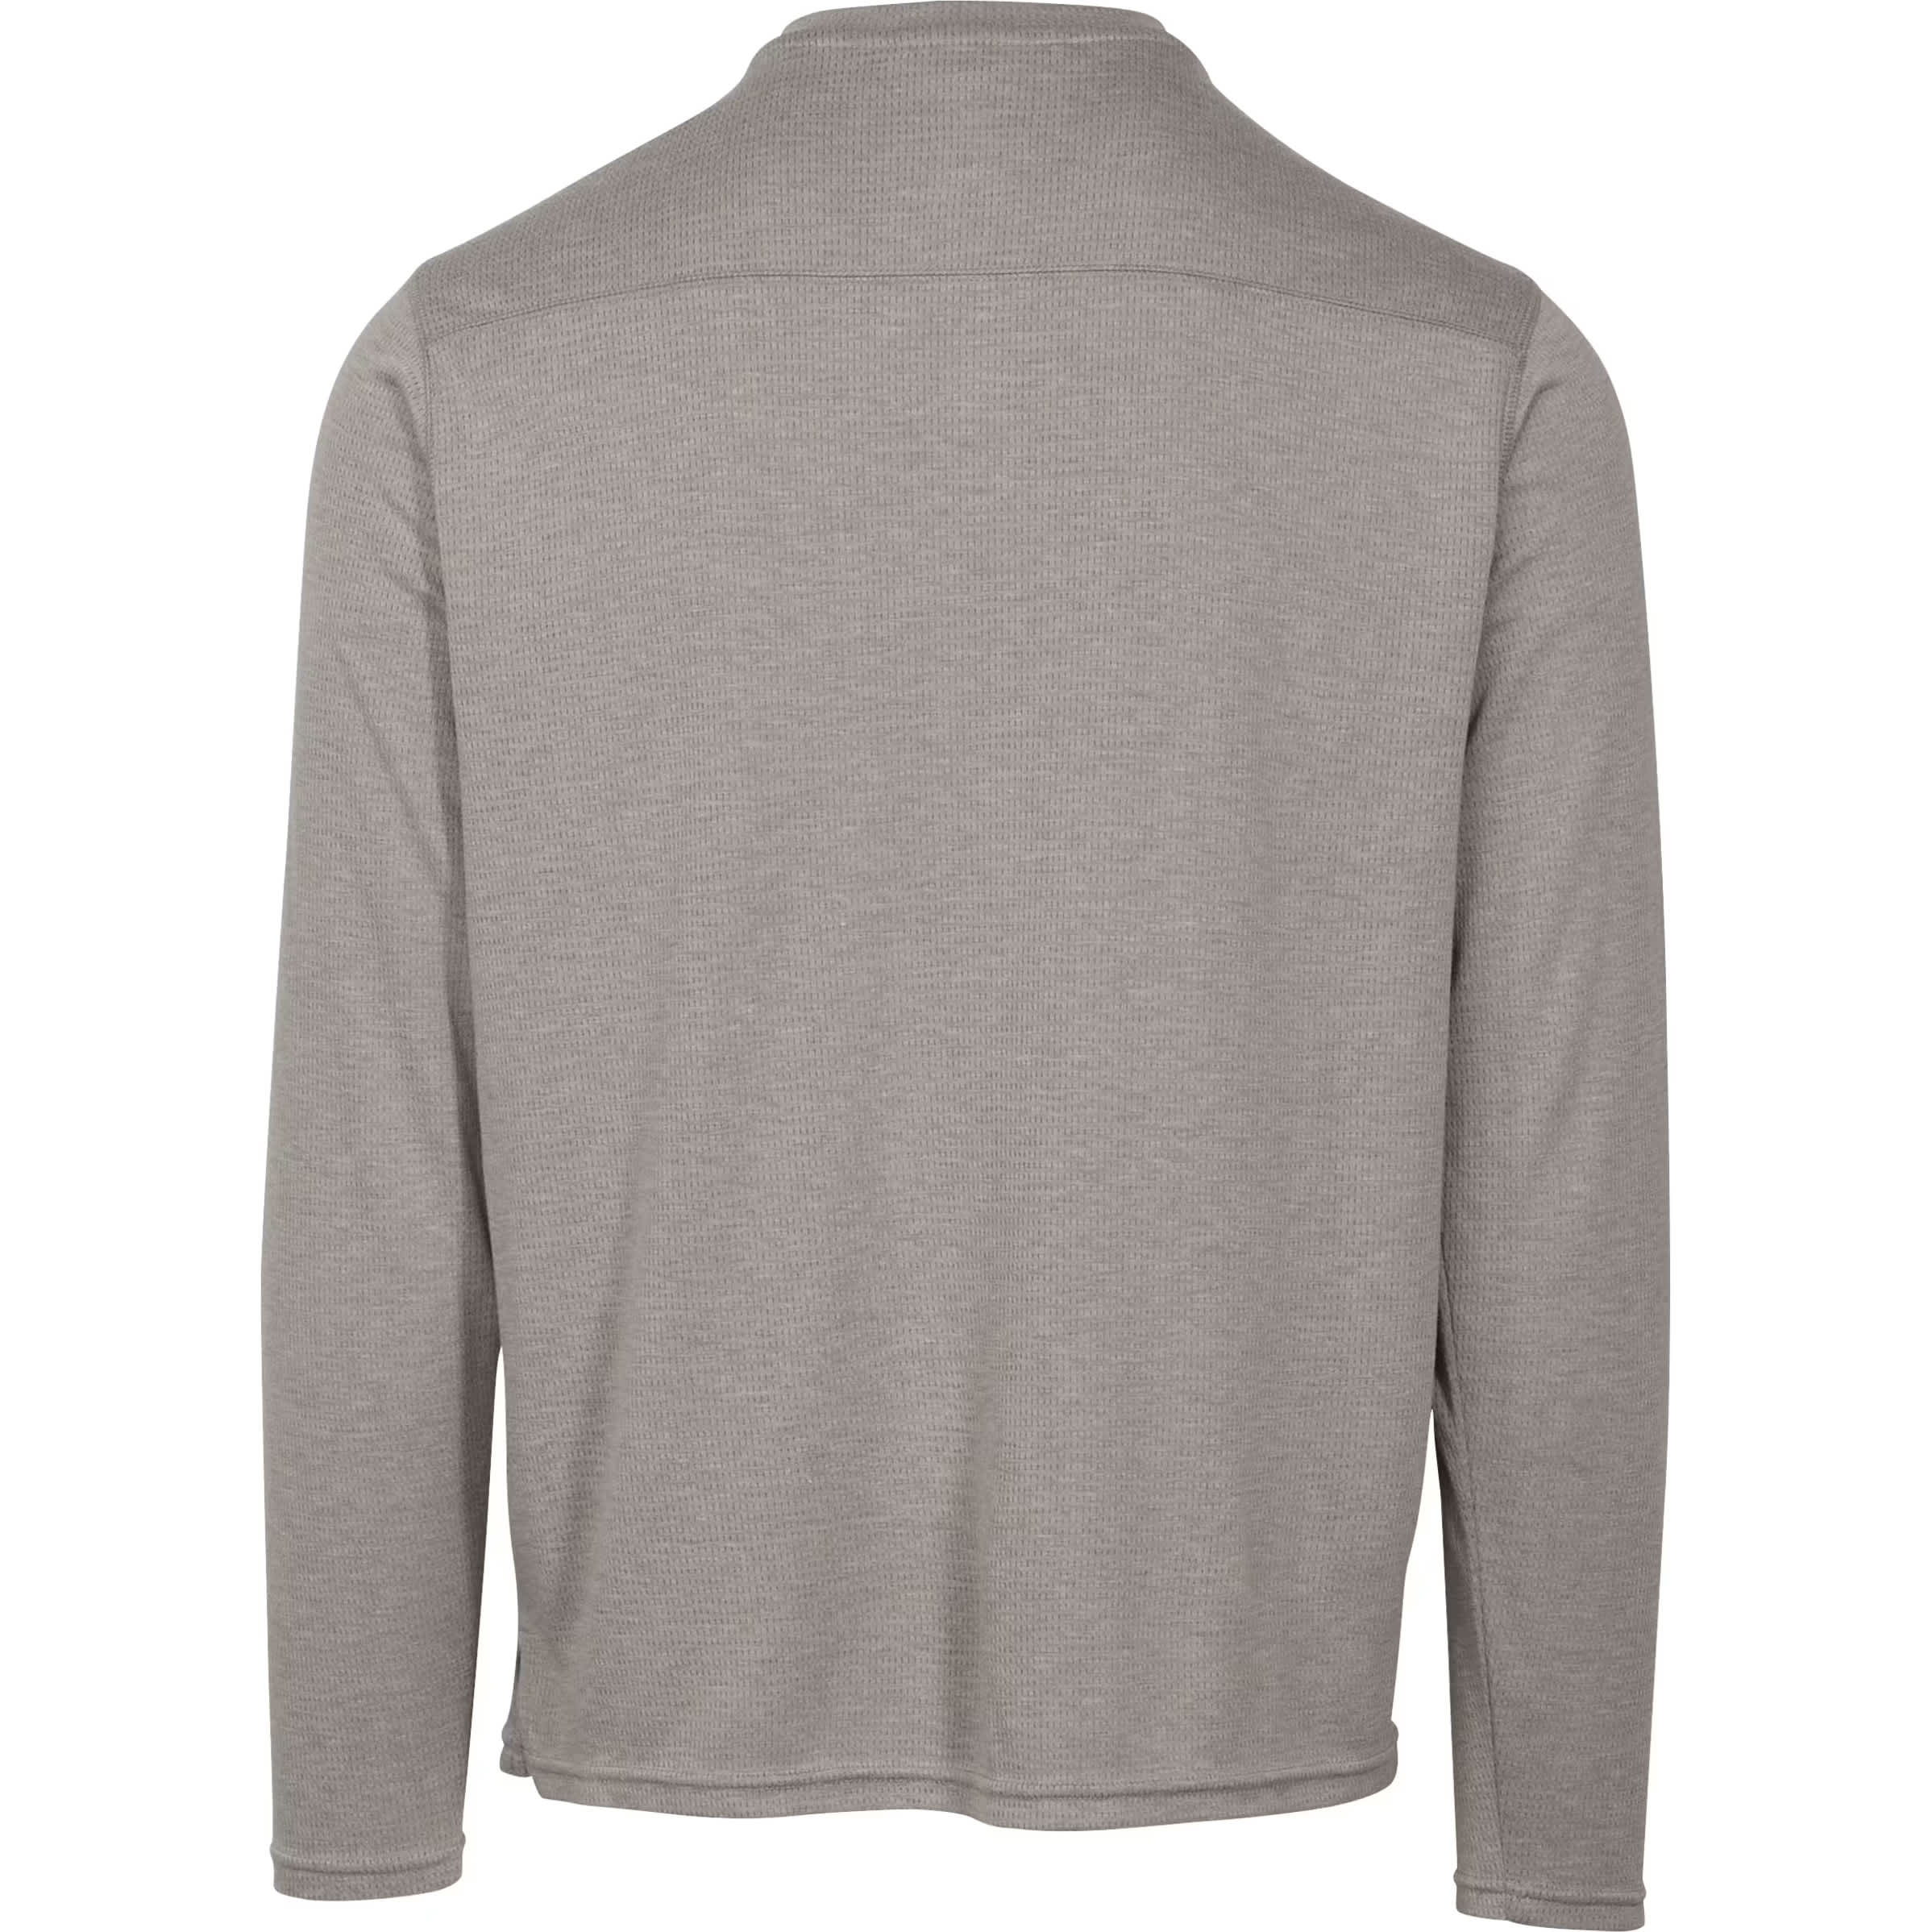 RedHead Ranch Grand Forks Waffle-Knit Long-Sleeve Henley for Men